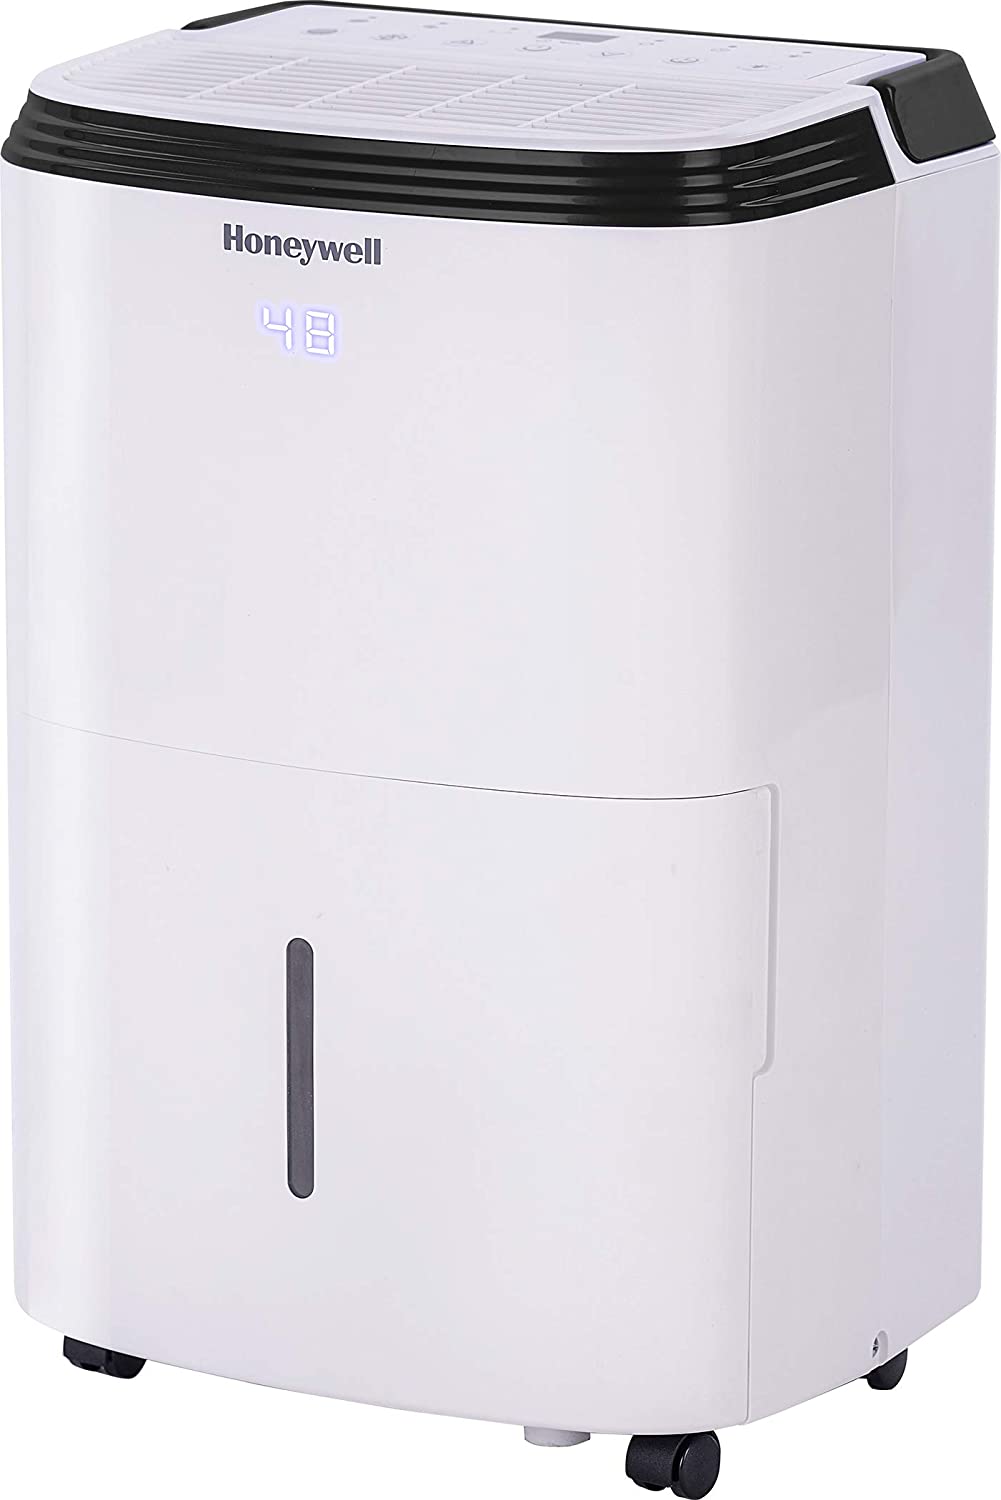 Honeywell TP70PWK 70 Pint Dehumidifier with Built-In Pump